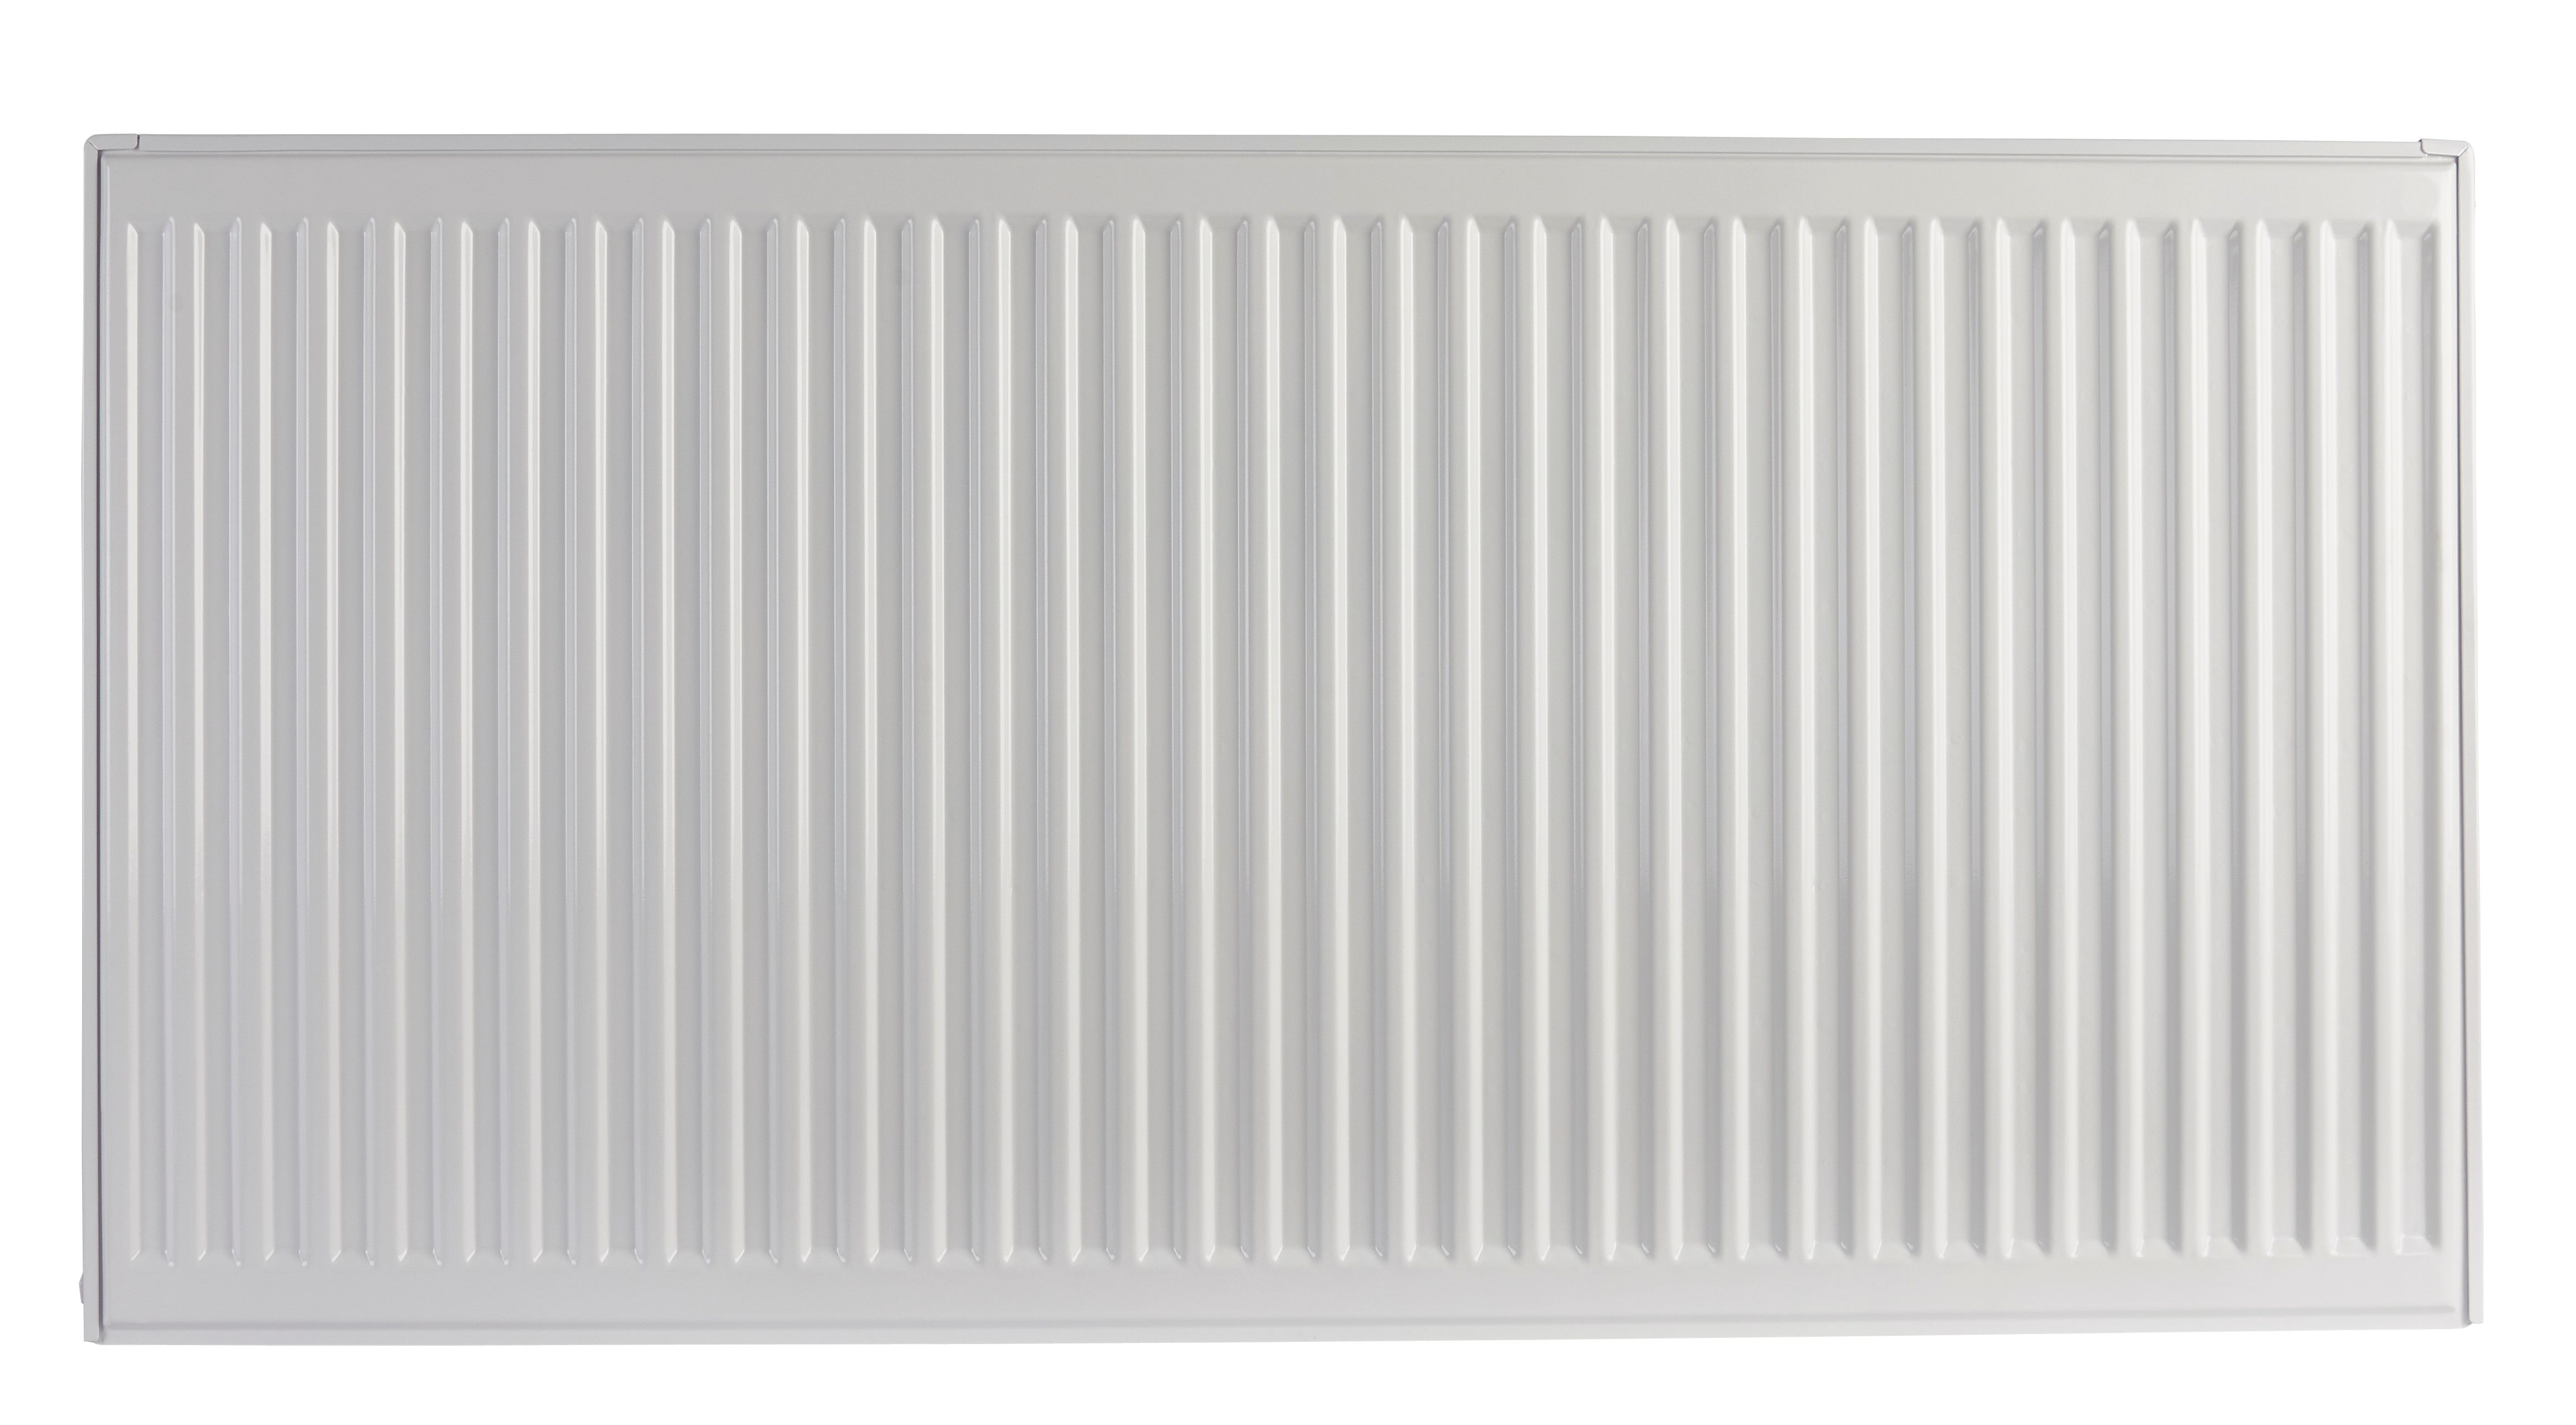 Image of Homeline by Stelrad 700 x 1400mm Type 11 Single Panel Single Convector Radiator